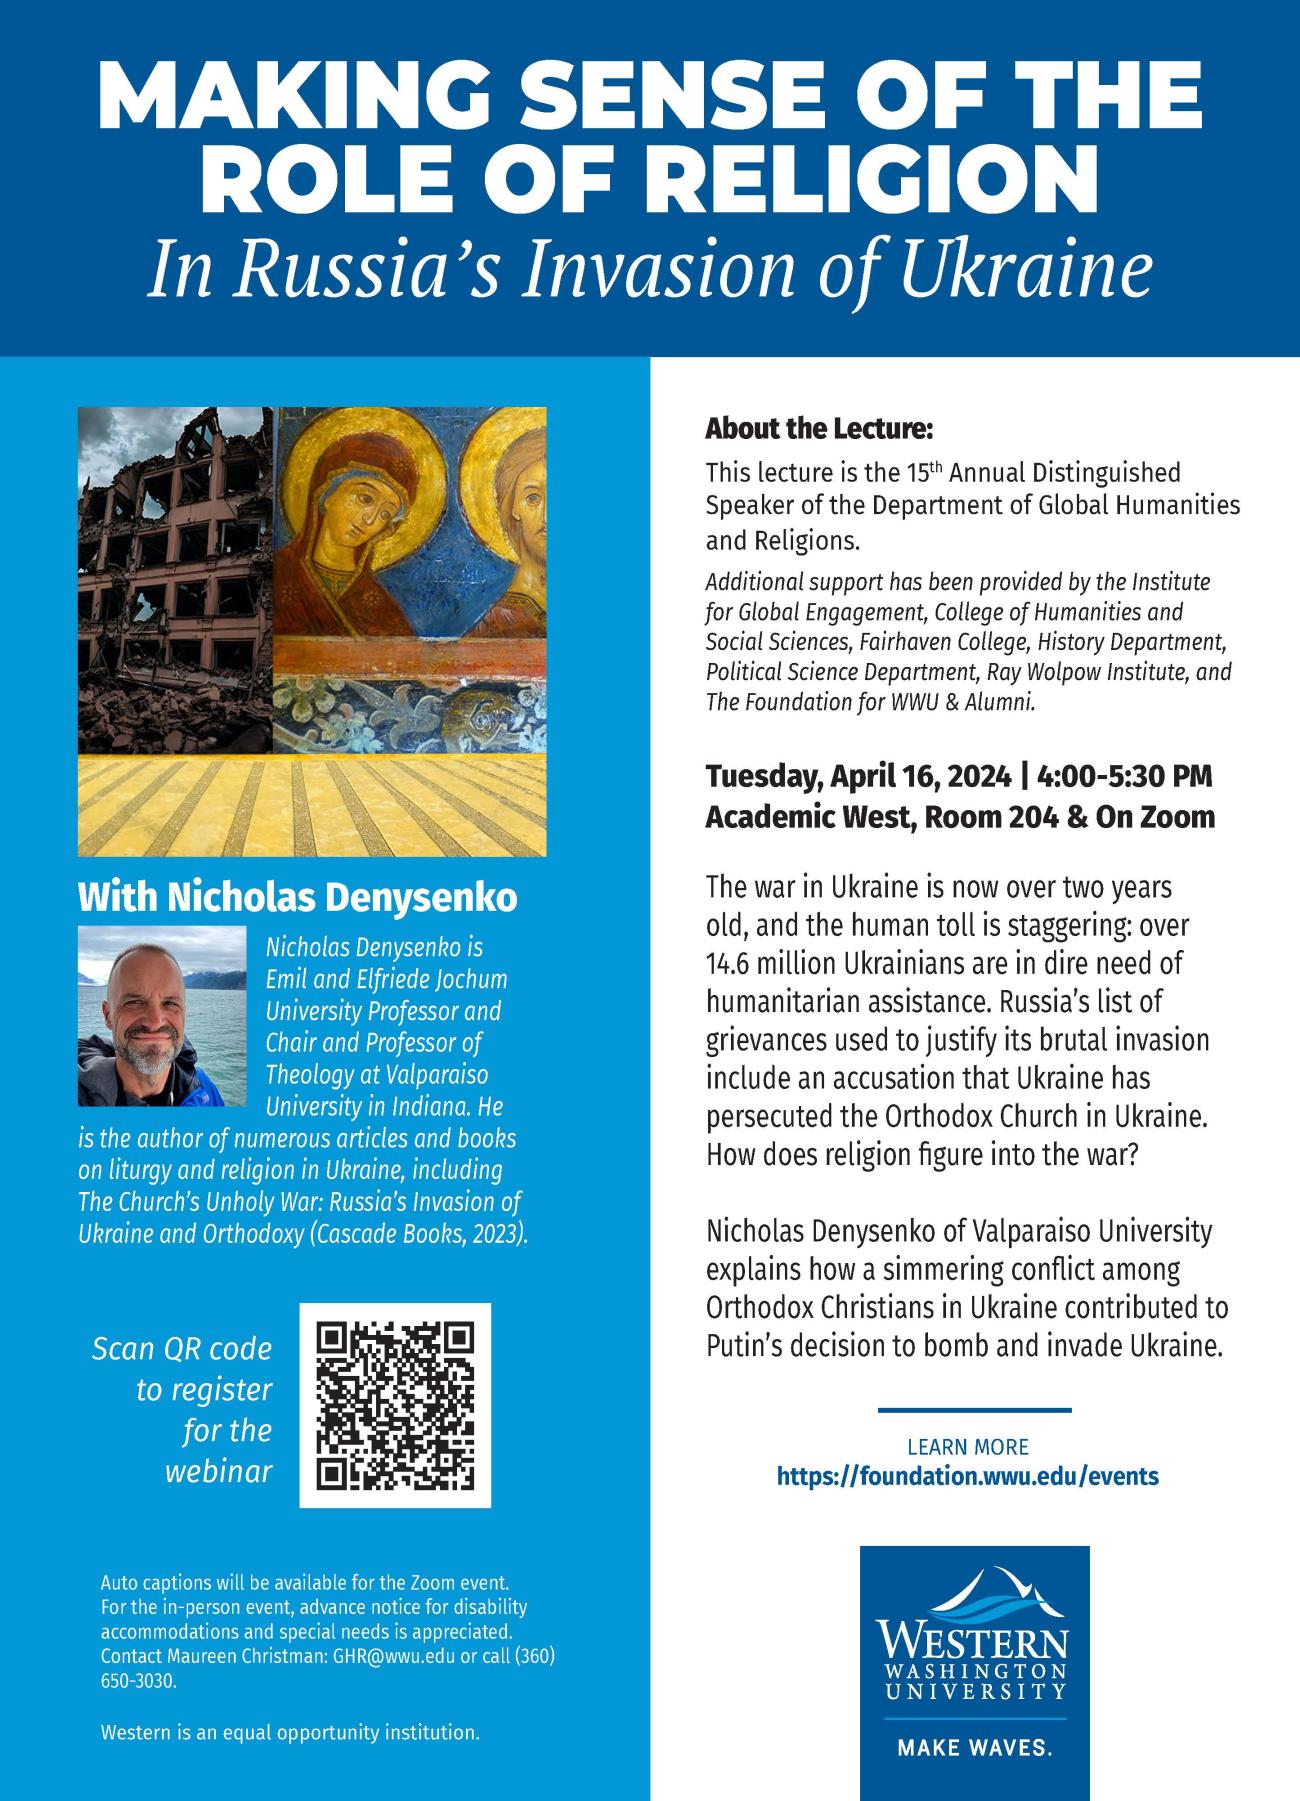 Making sense of the role of religion in Russia's invasion of Ukraine poster